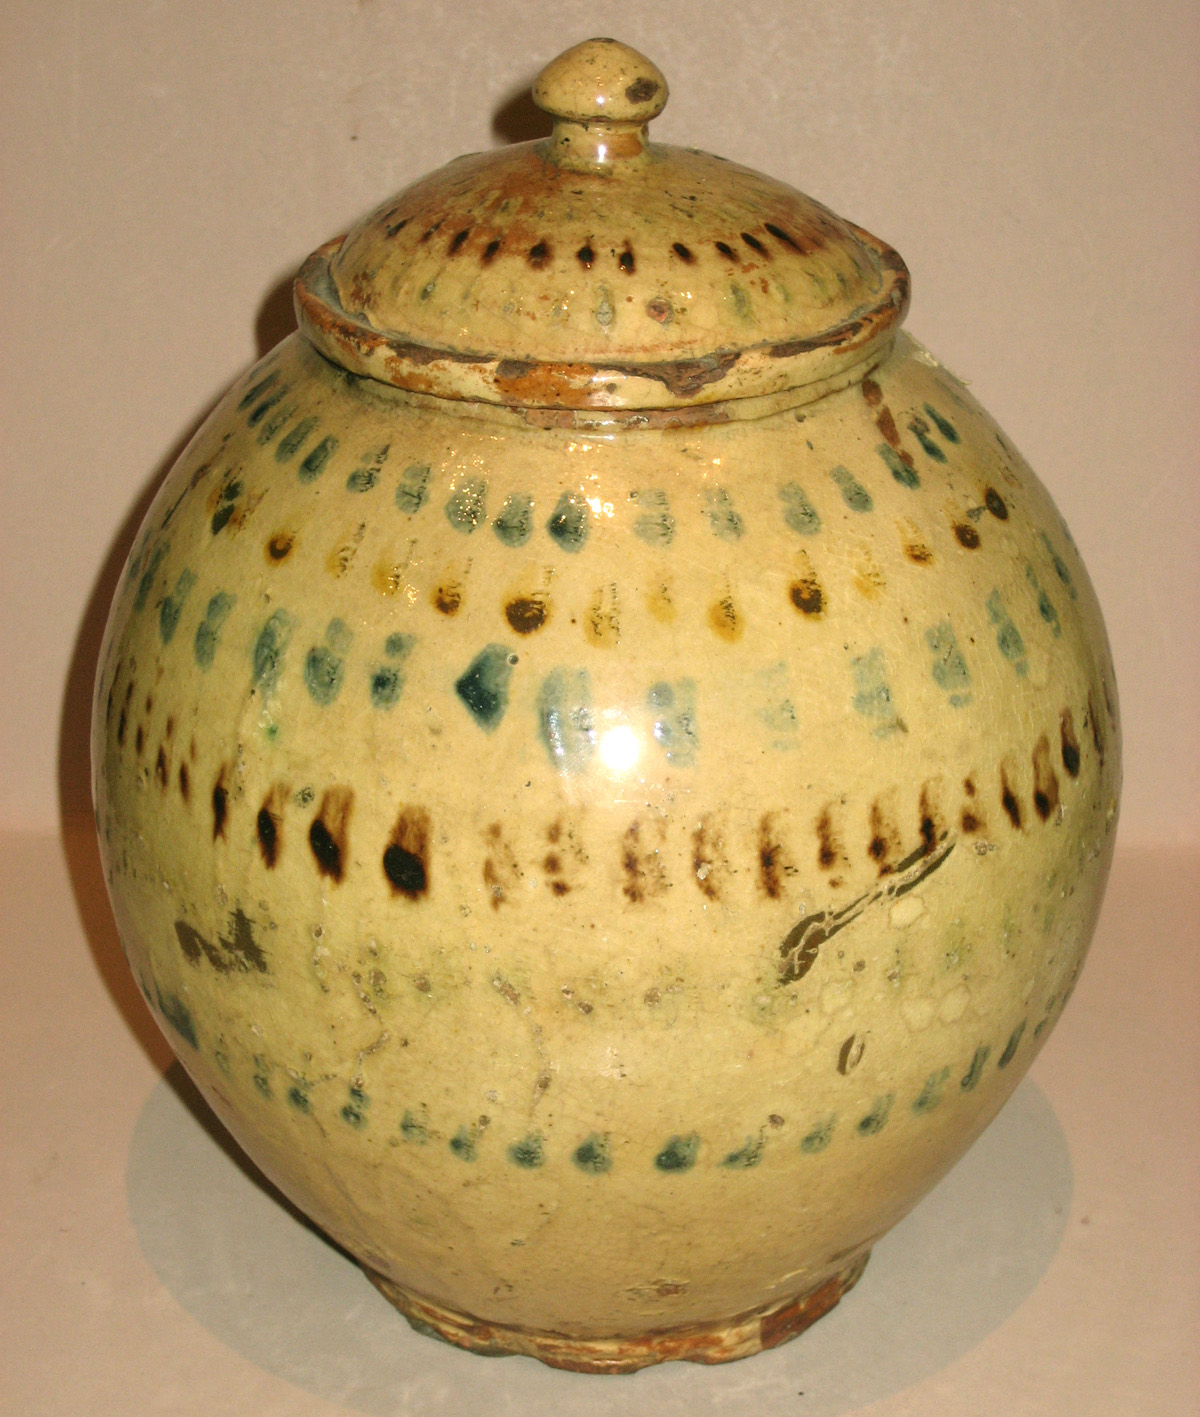 1958.0120.023 Jar and Cover